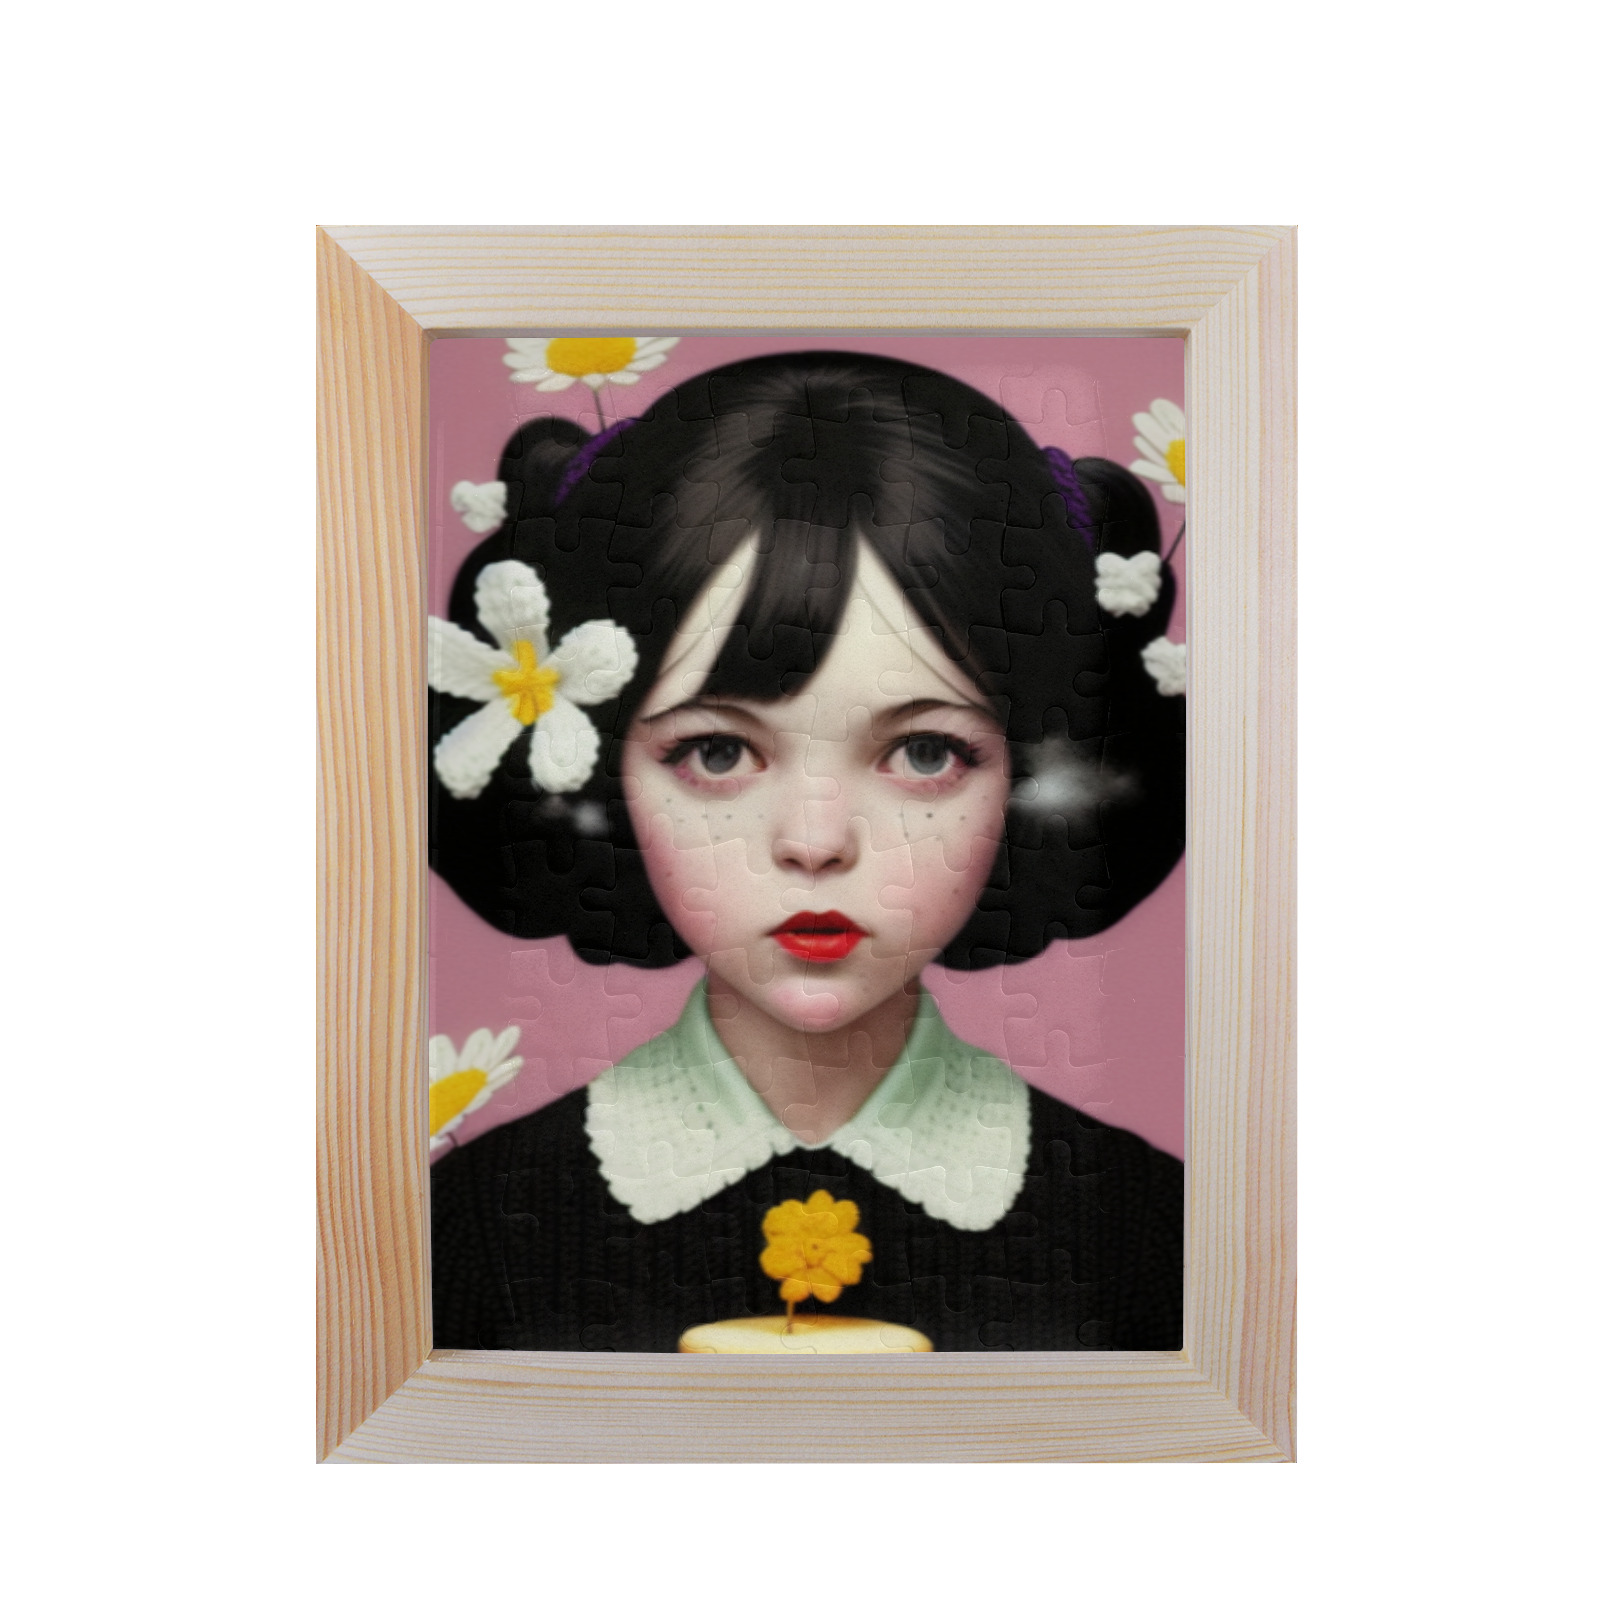 gothic girl with lipstick 65 80-Piece Puzzle Frame 7"x 9"